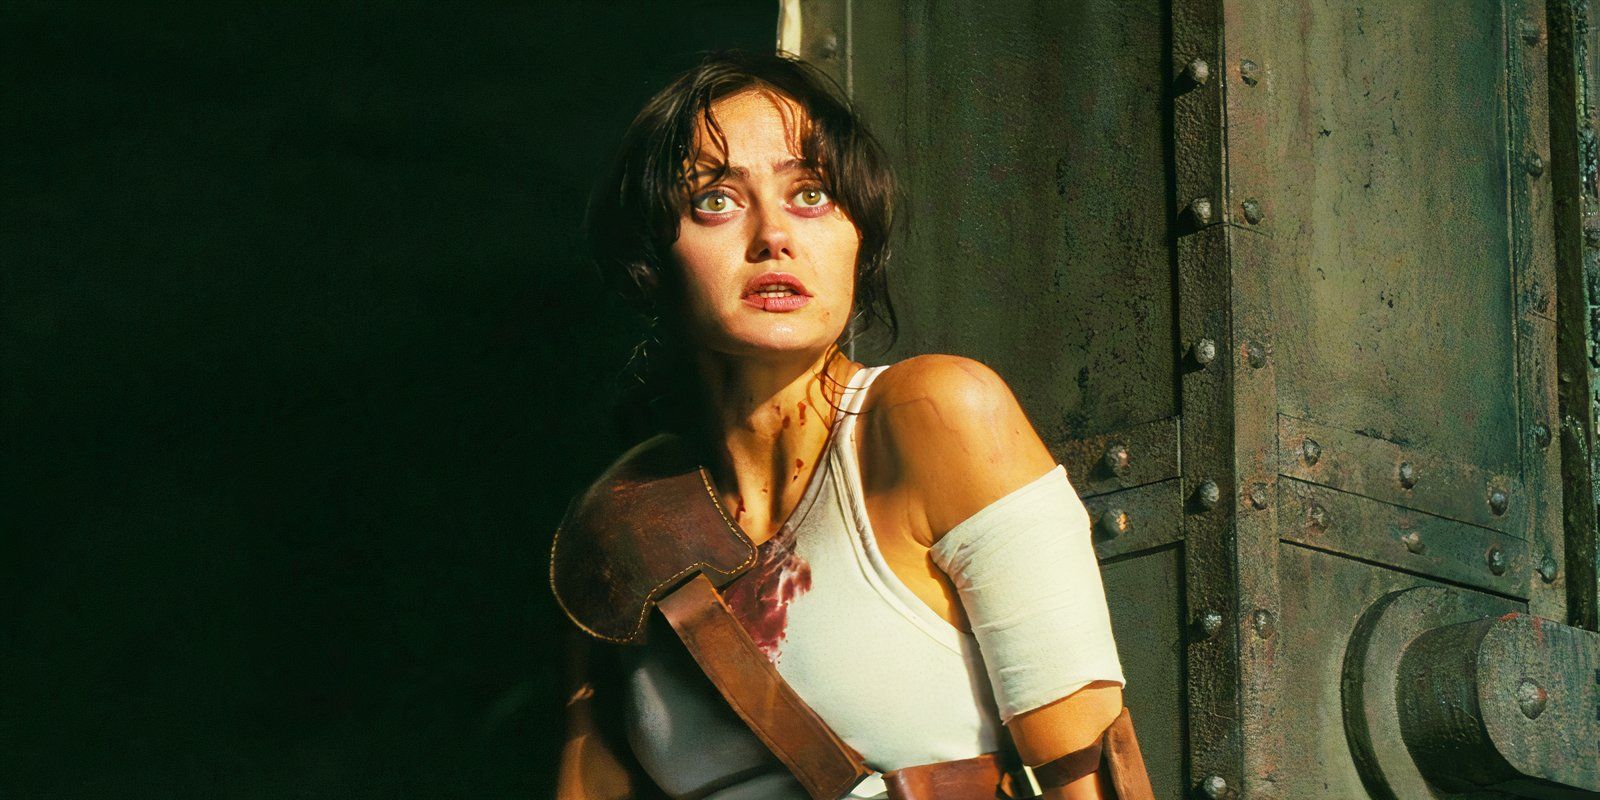 Ella Purnell as Lucy looking concerned in Fallout season 1